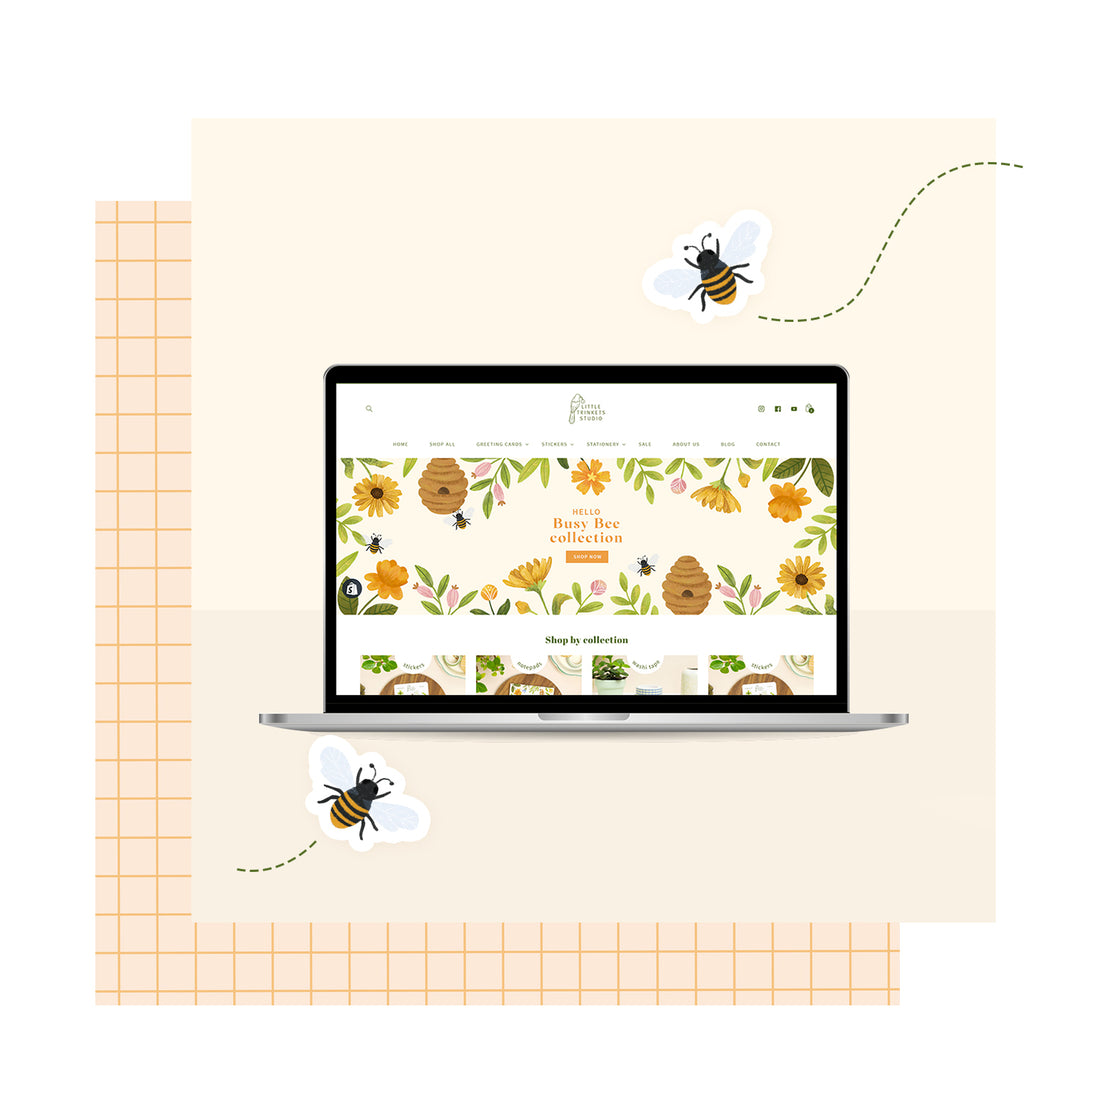 New website with flying bees